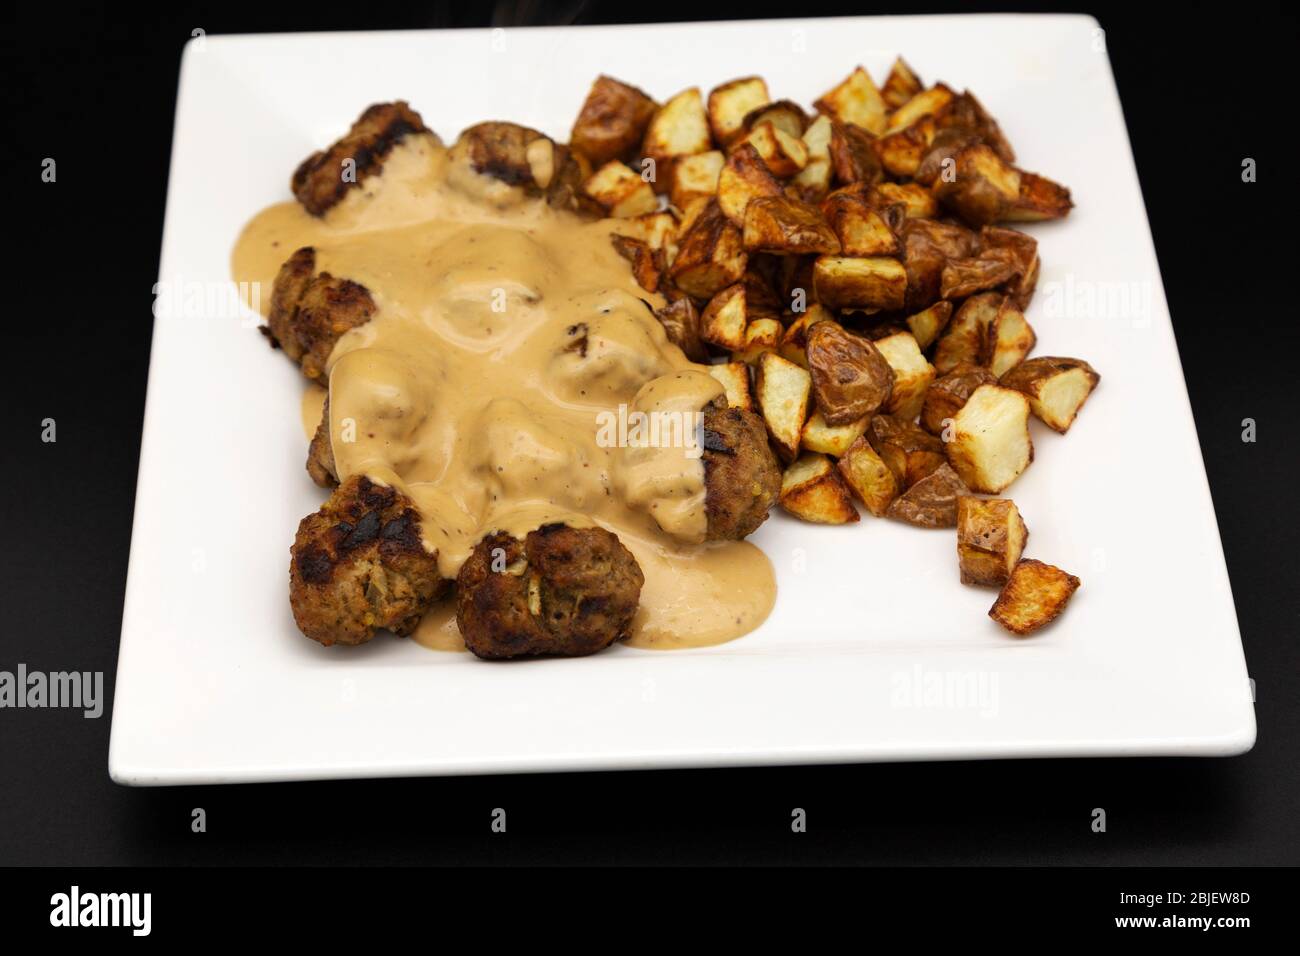 A plate of home-cooked Swedish style meatballs (Svenska Kottbullar) and creamy sauce made to the recipe published by Ikea. Stock Photo